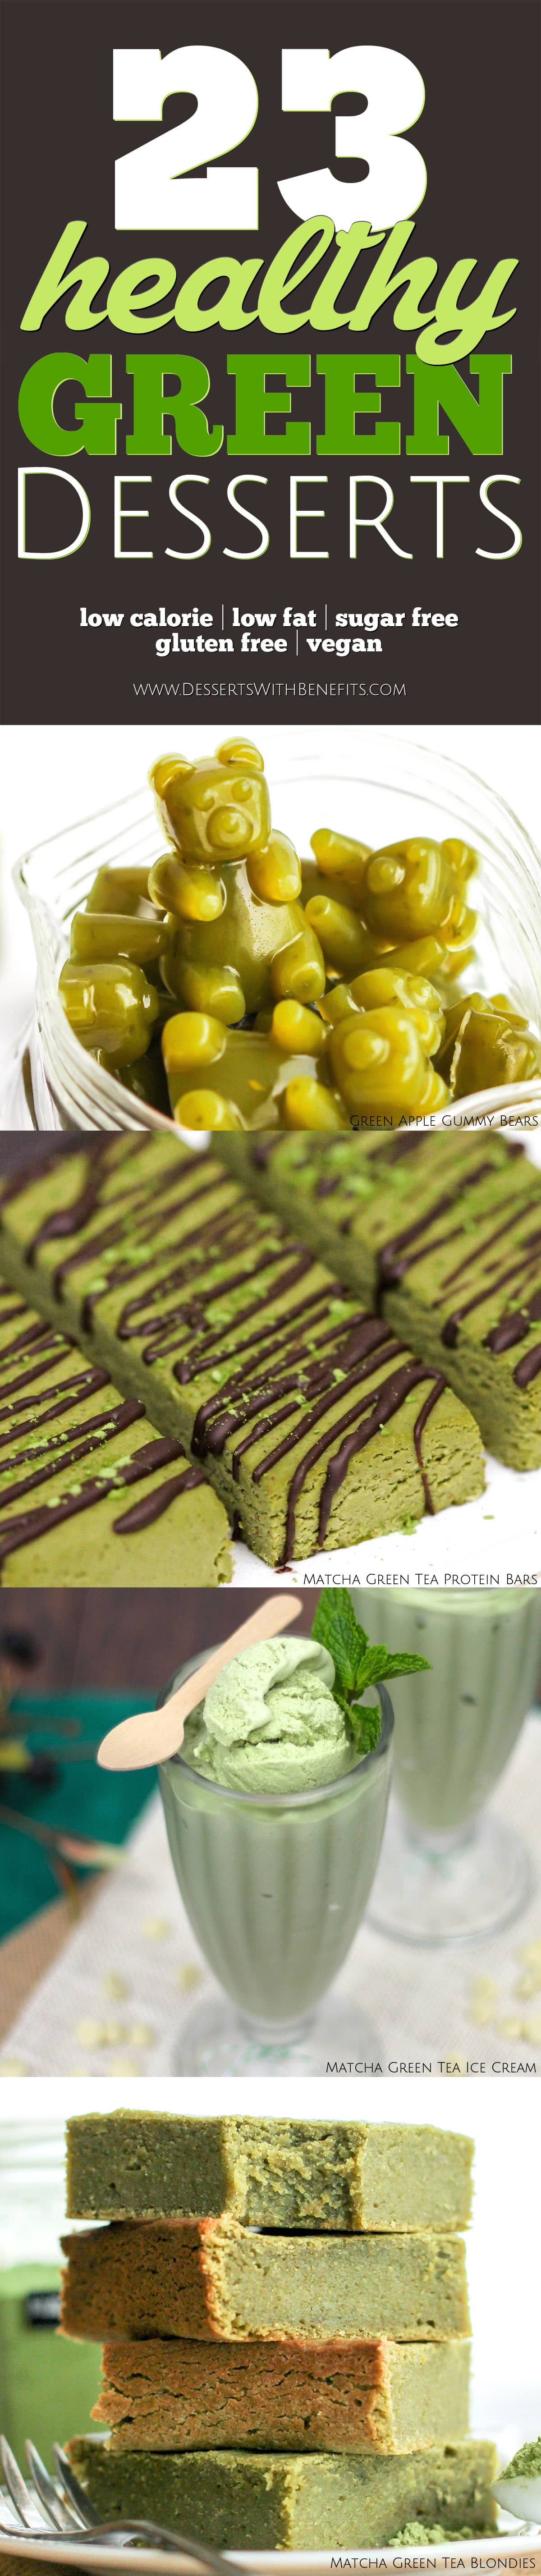 Here’s a roundup of 23 HEALTHY green dessert recipes! From Key Lime Cheesecake to Gummy Bears to Matcha Green Tea Protein Bars to Green Smoothie Ice Cream -- you’ll be sure to find a recipe perfect to celebrate St. Patrick’s Day, Christmas, or the birthday of someone who loves green! These healthy recipes are suitable for everyone with sugar free, low calorie, low fat, high protein, gluten free, dairy free, and vegan options.